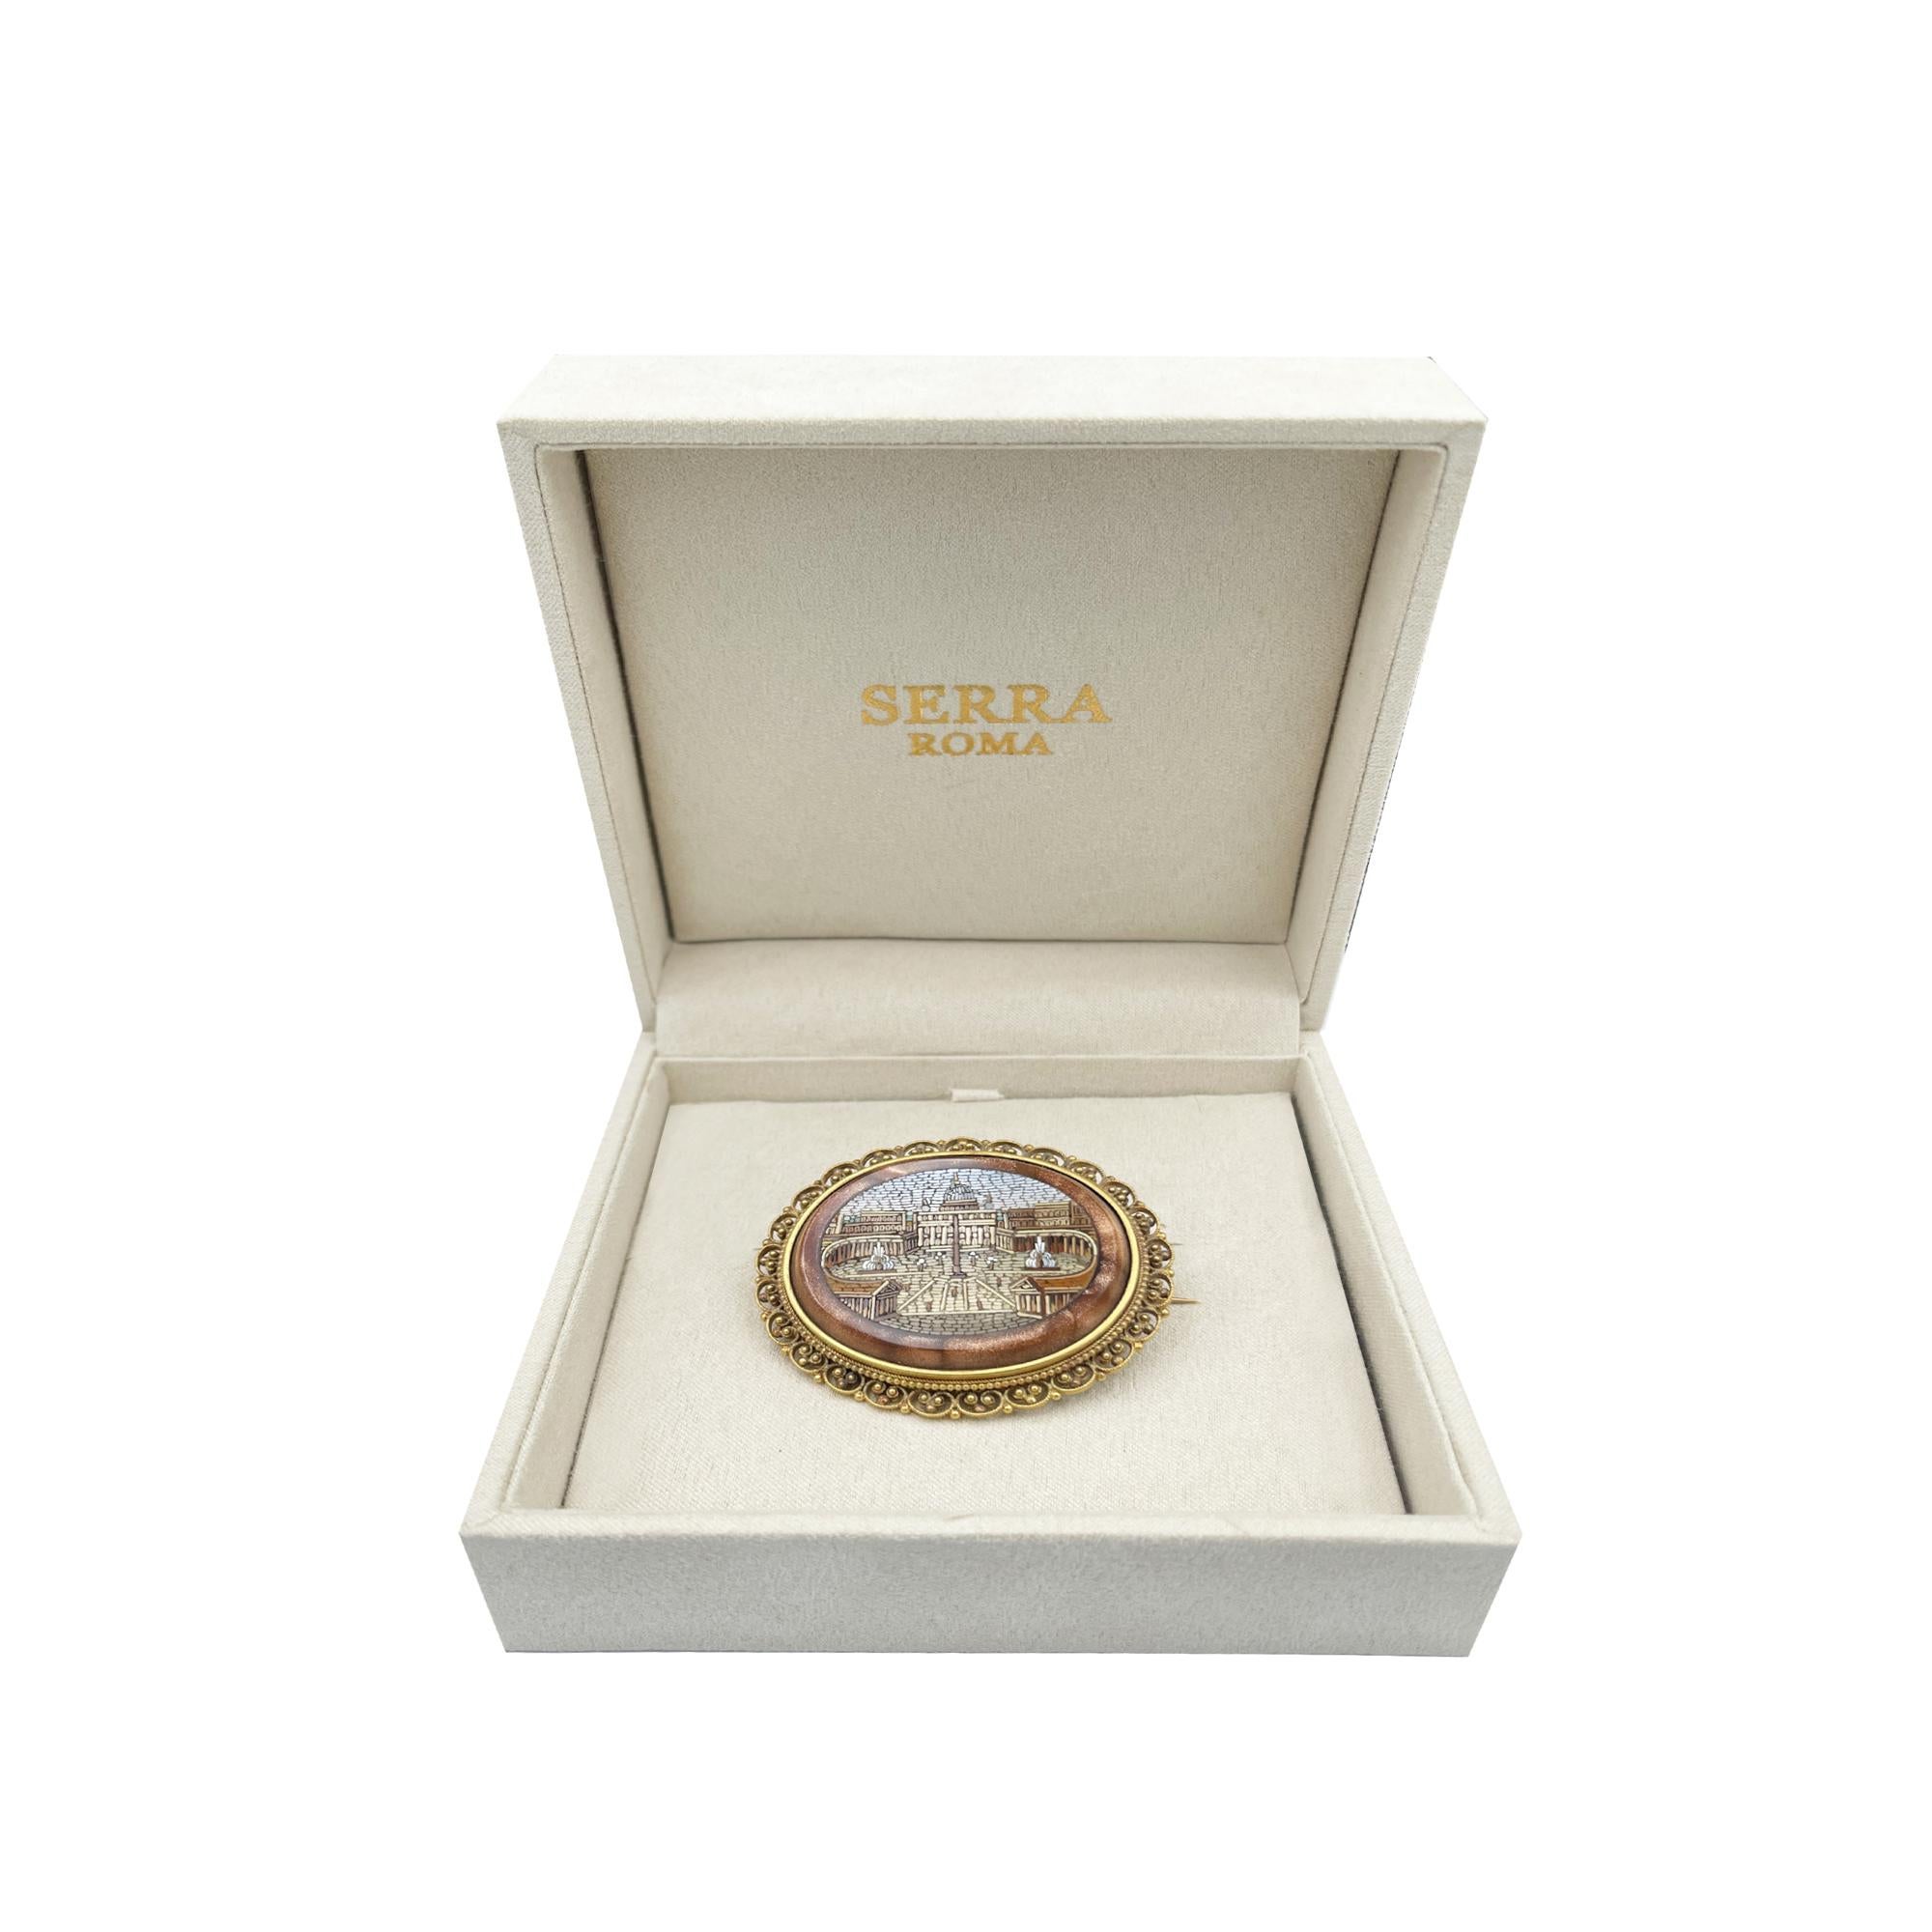 In this 18 kt gold brooch is set a beautiful micromosaic (circa 1850) depicting St. Peter's Basilica.
The 